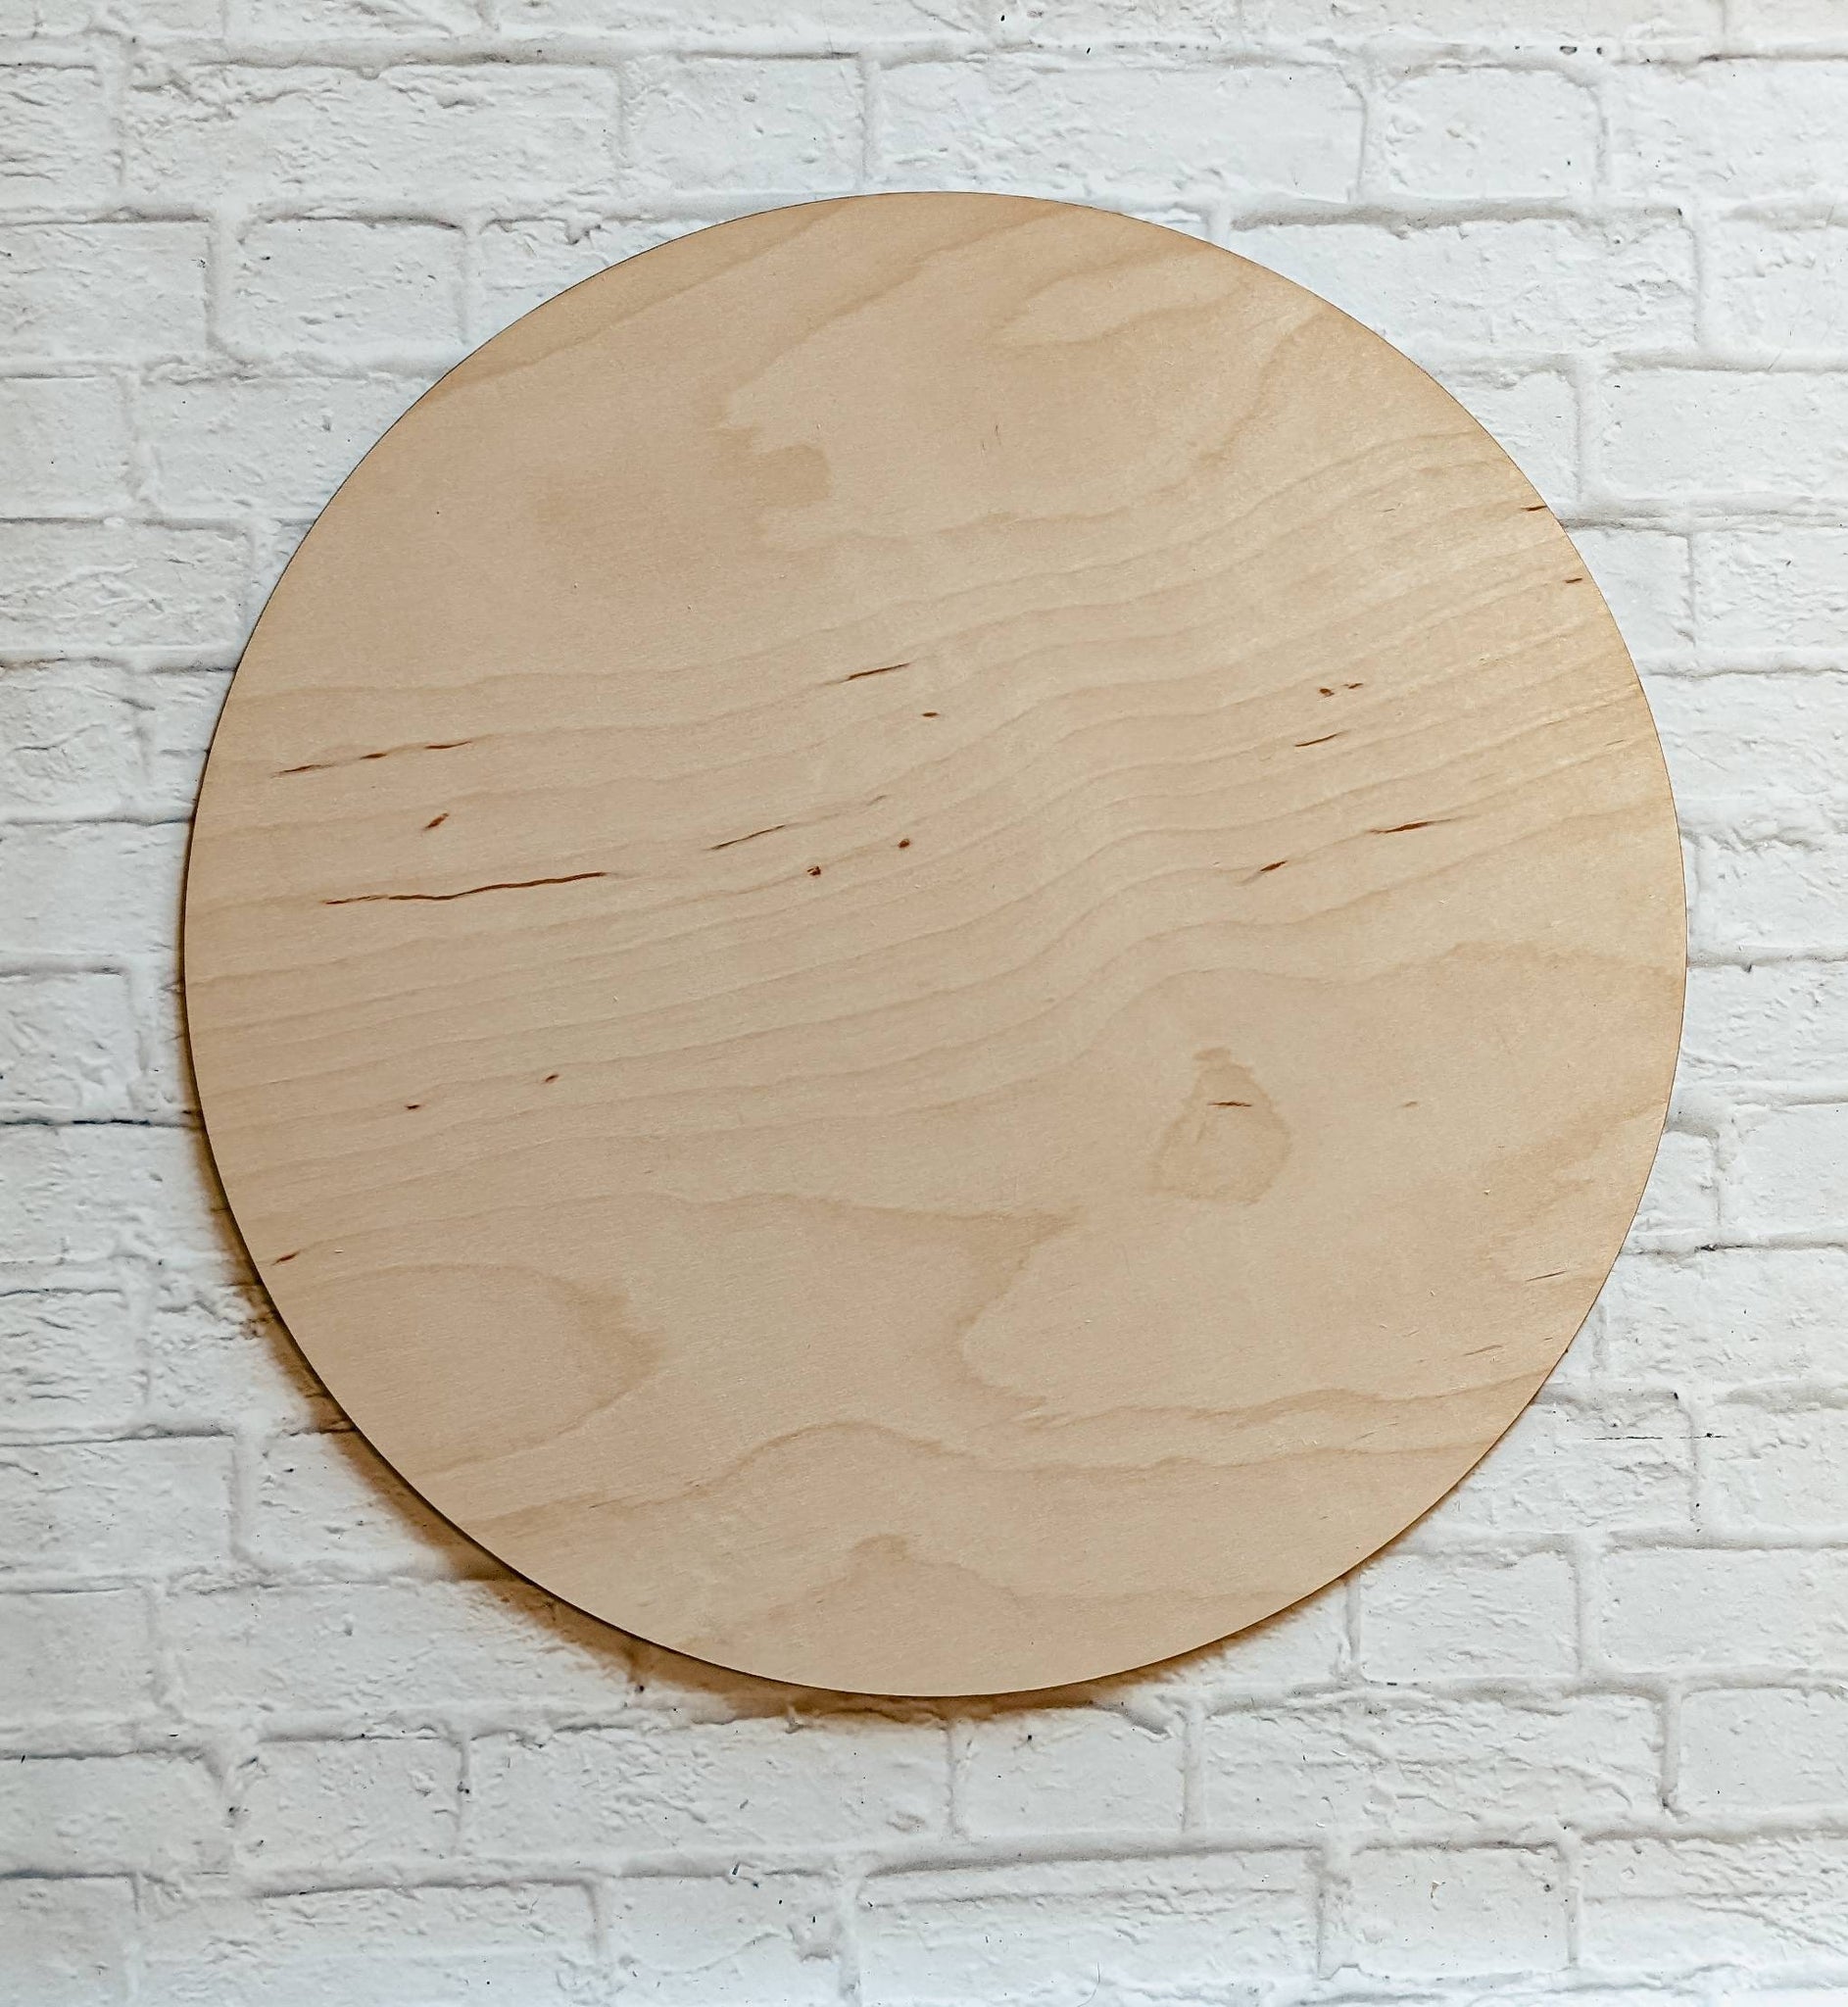 CIRCLE SHAPE - Off sizes- Pack of 10 - Unfinished 1/4" Wood - Various Sizes - Wooden Blanks- Wooden Shapes - laser cut shape